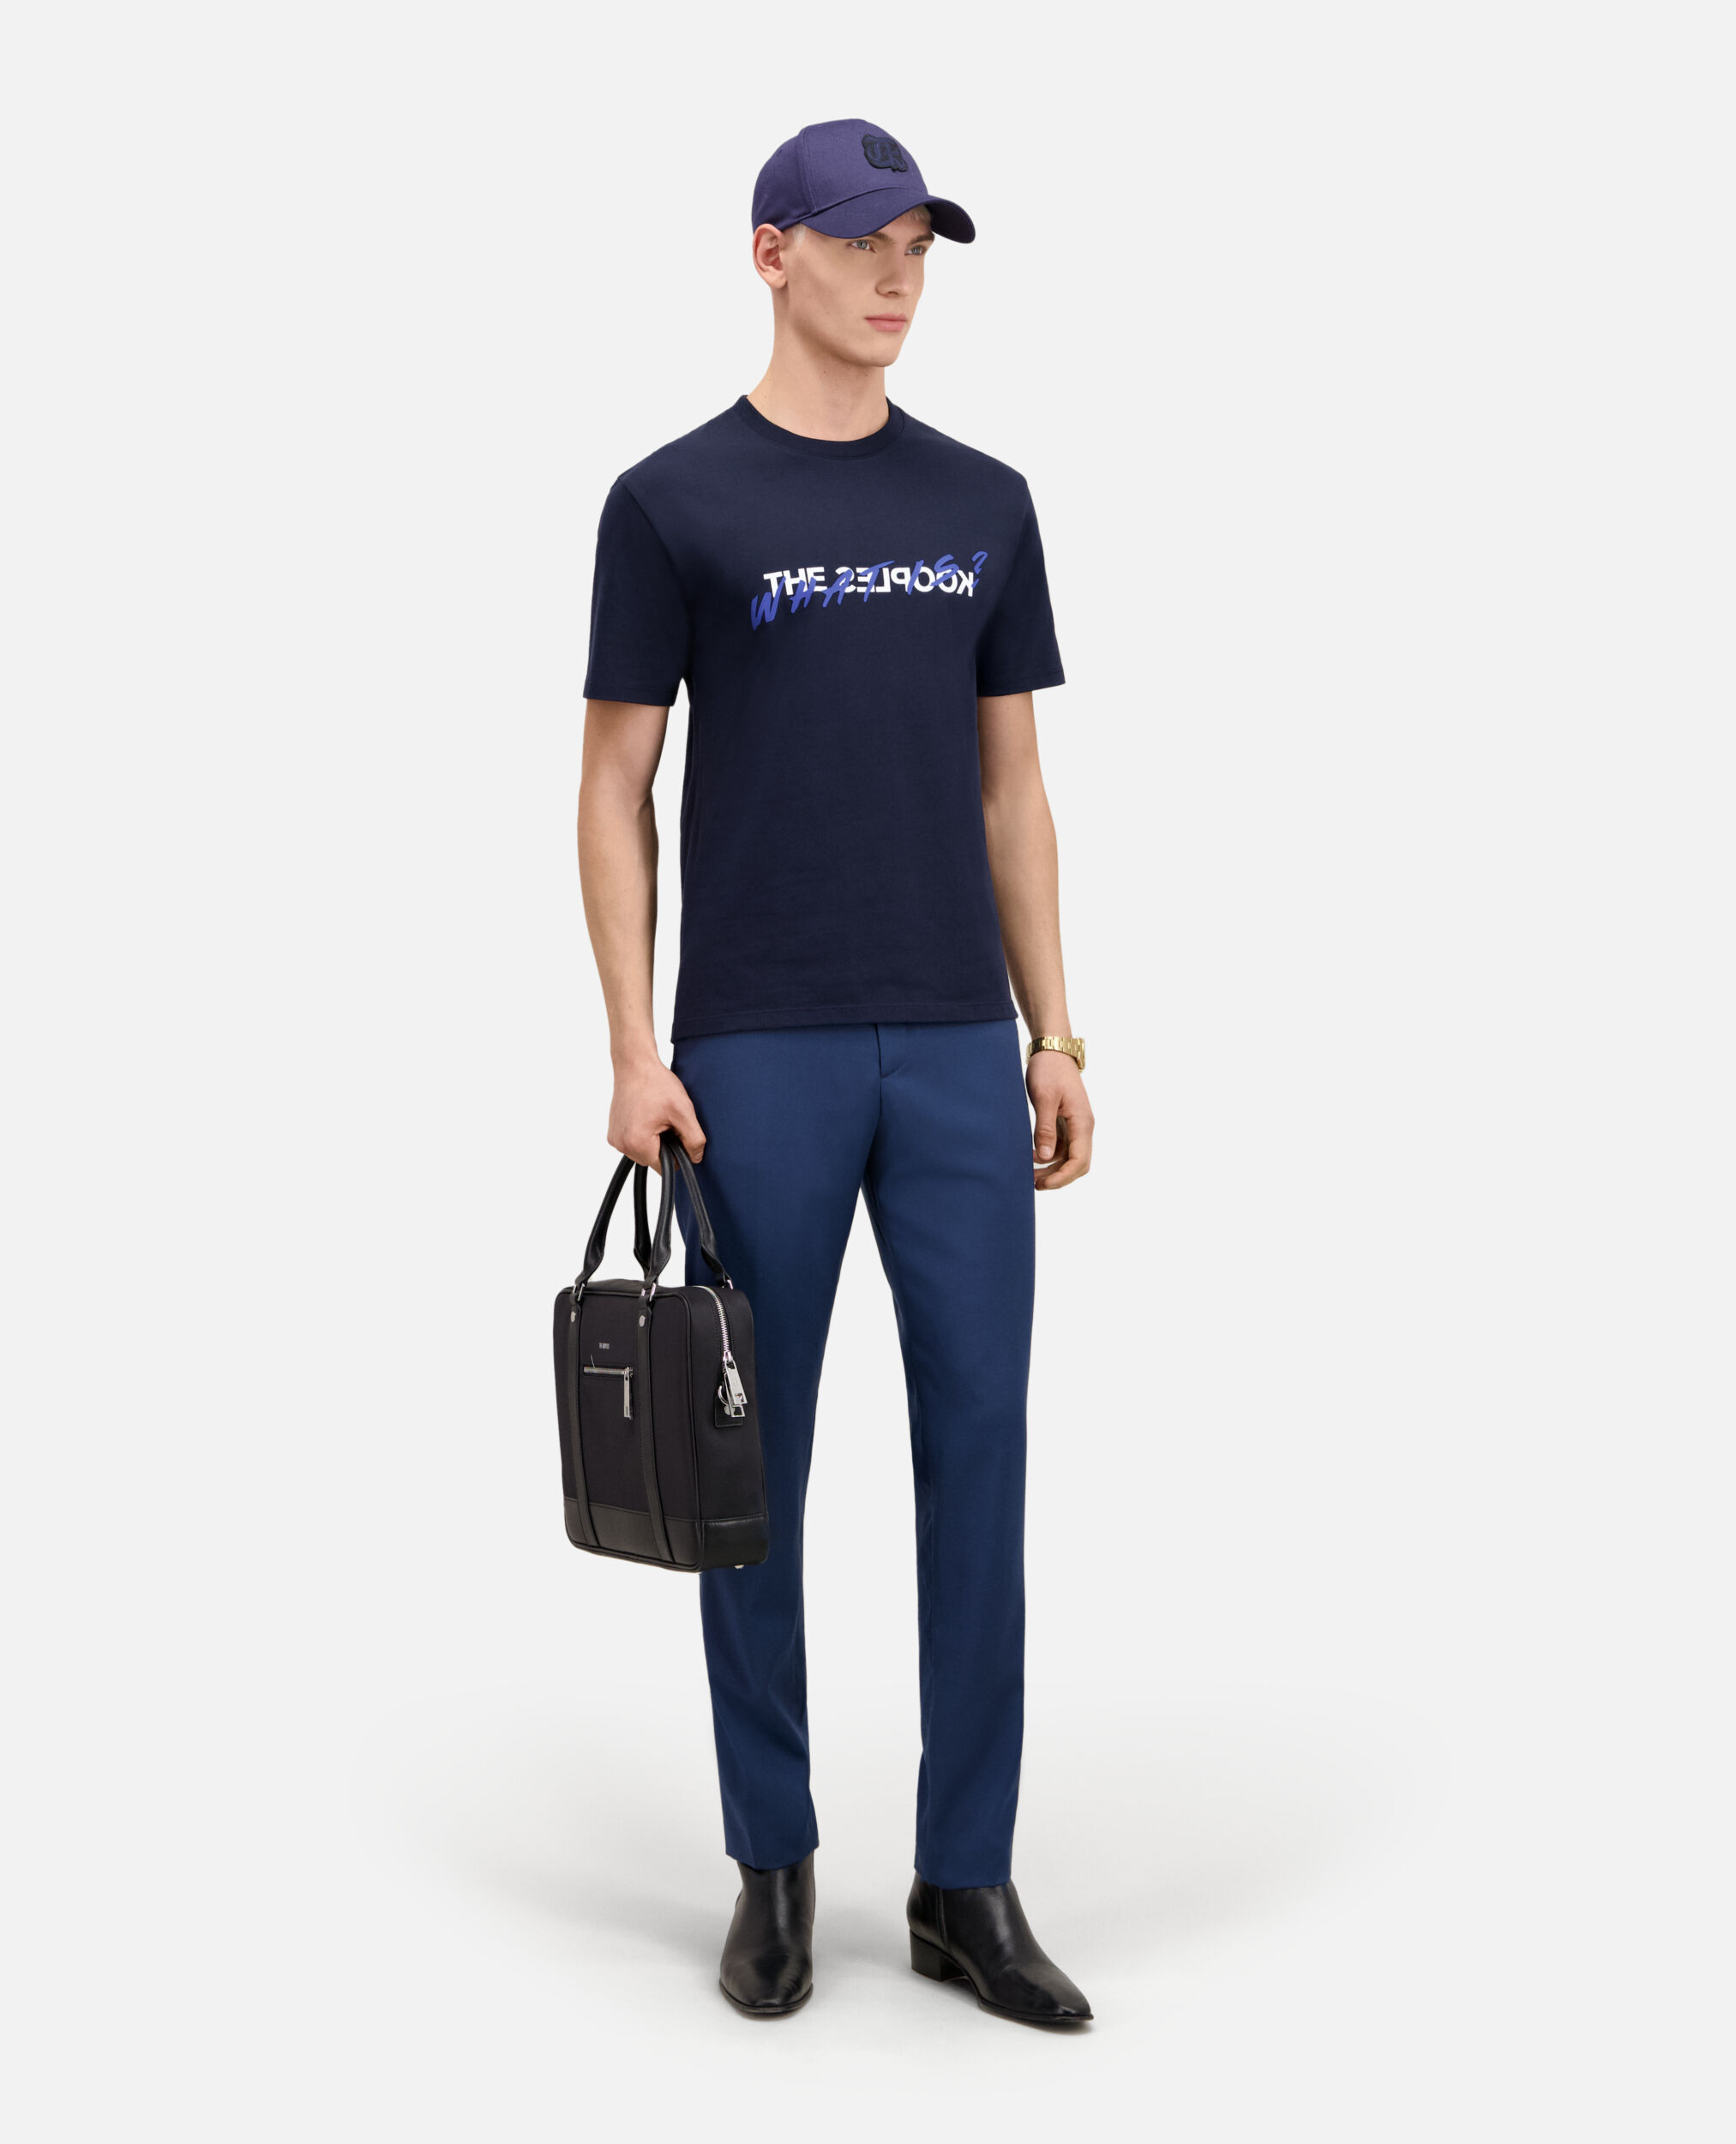 Camiseta What is azul para hombre, NAVY, hi-res image number null